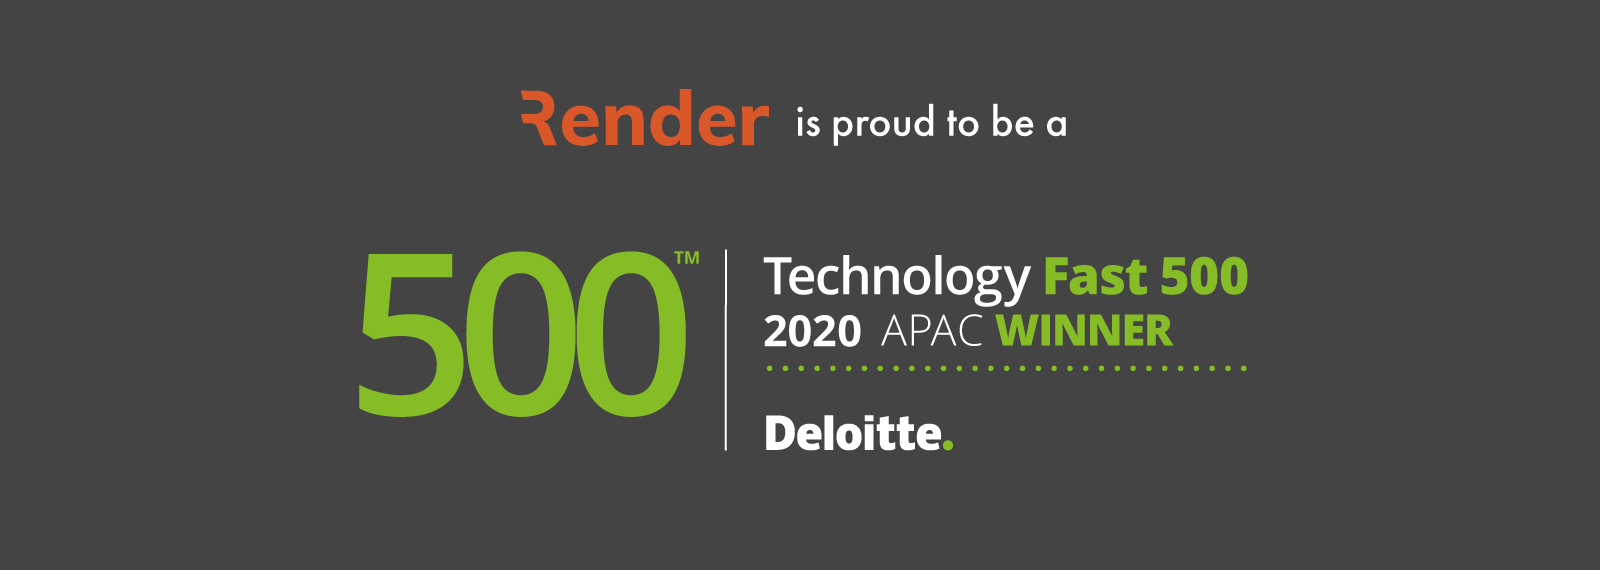 Render climbs 57 places in the 2020 Deloitte Fast 500 rankings